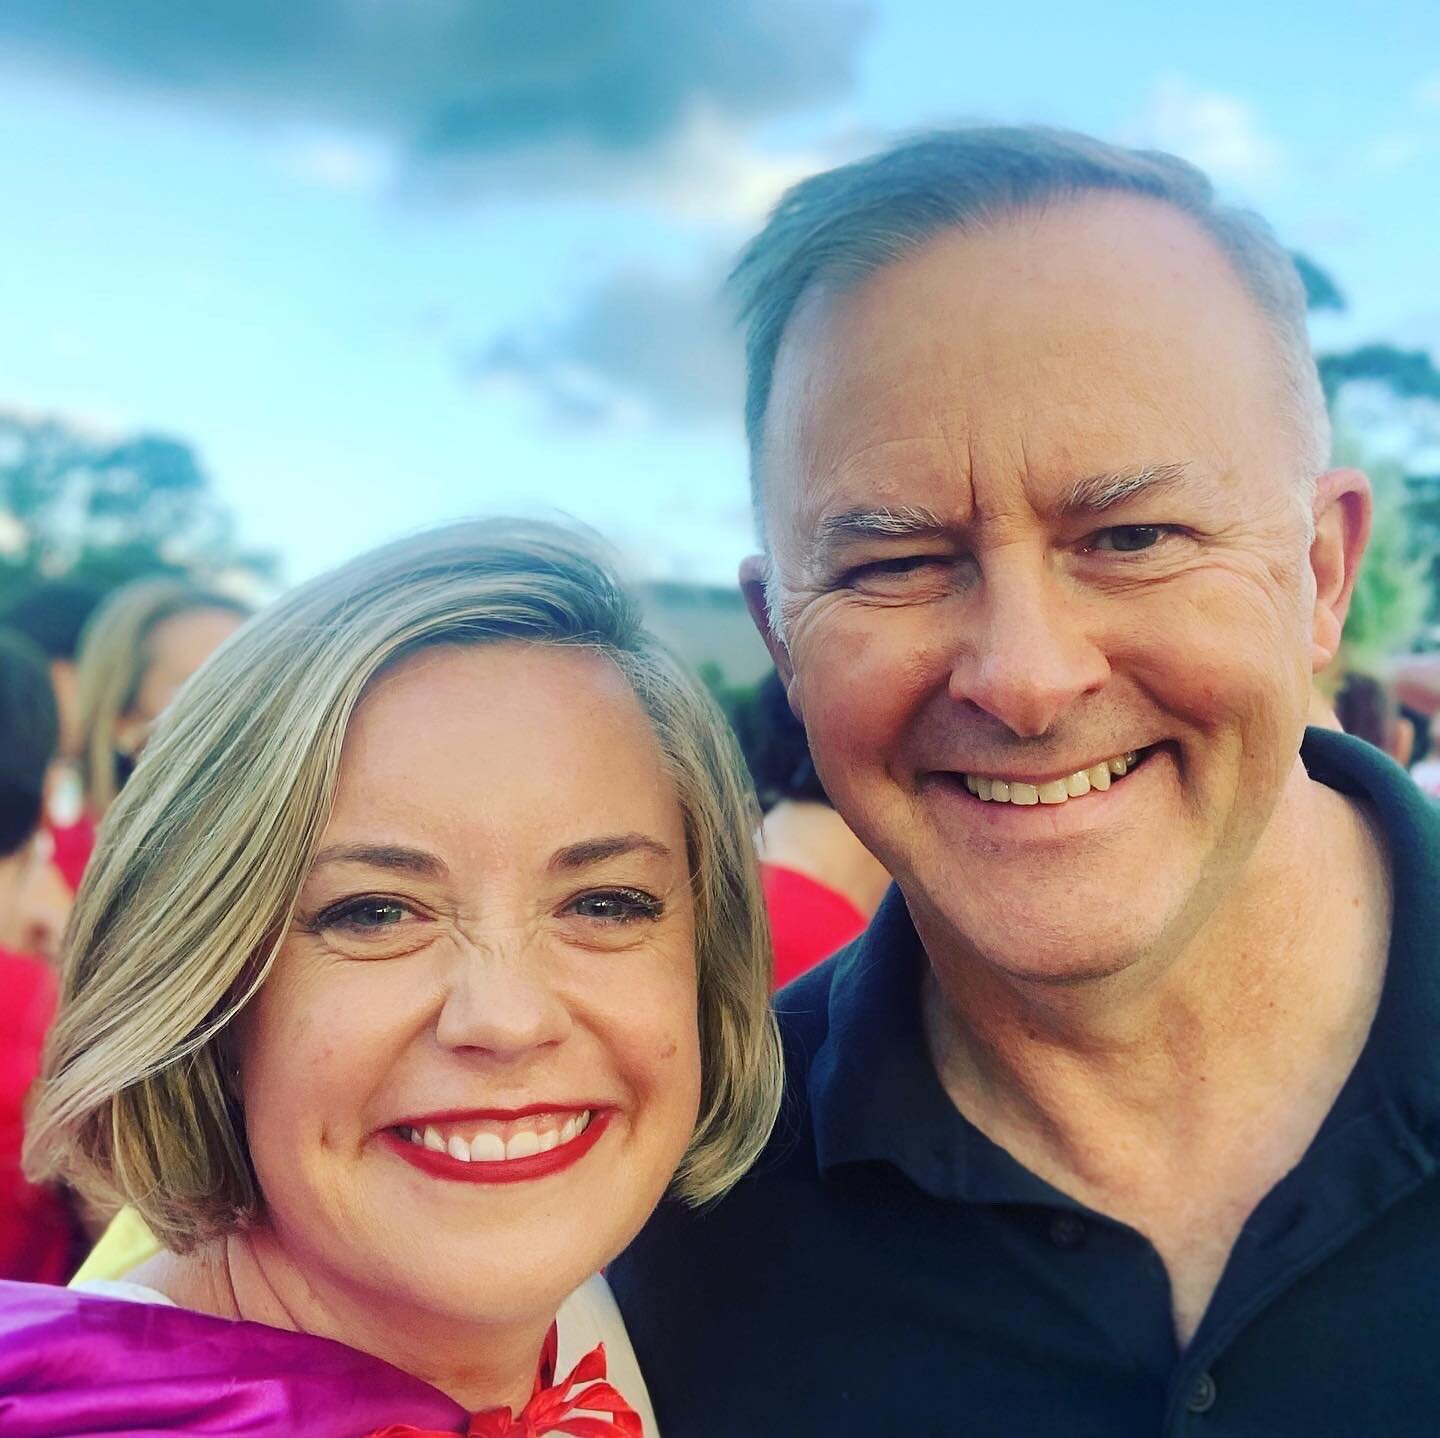 The Australian Local Government Association strongly welcomes Federal Opposition Labor leader Anthony Albanese&rsquo;s @albomp commitment to include Local Government on the National Cabinet should @AustralianLabor win the next federal election. 

ALG